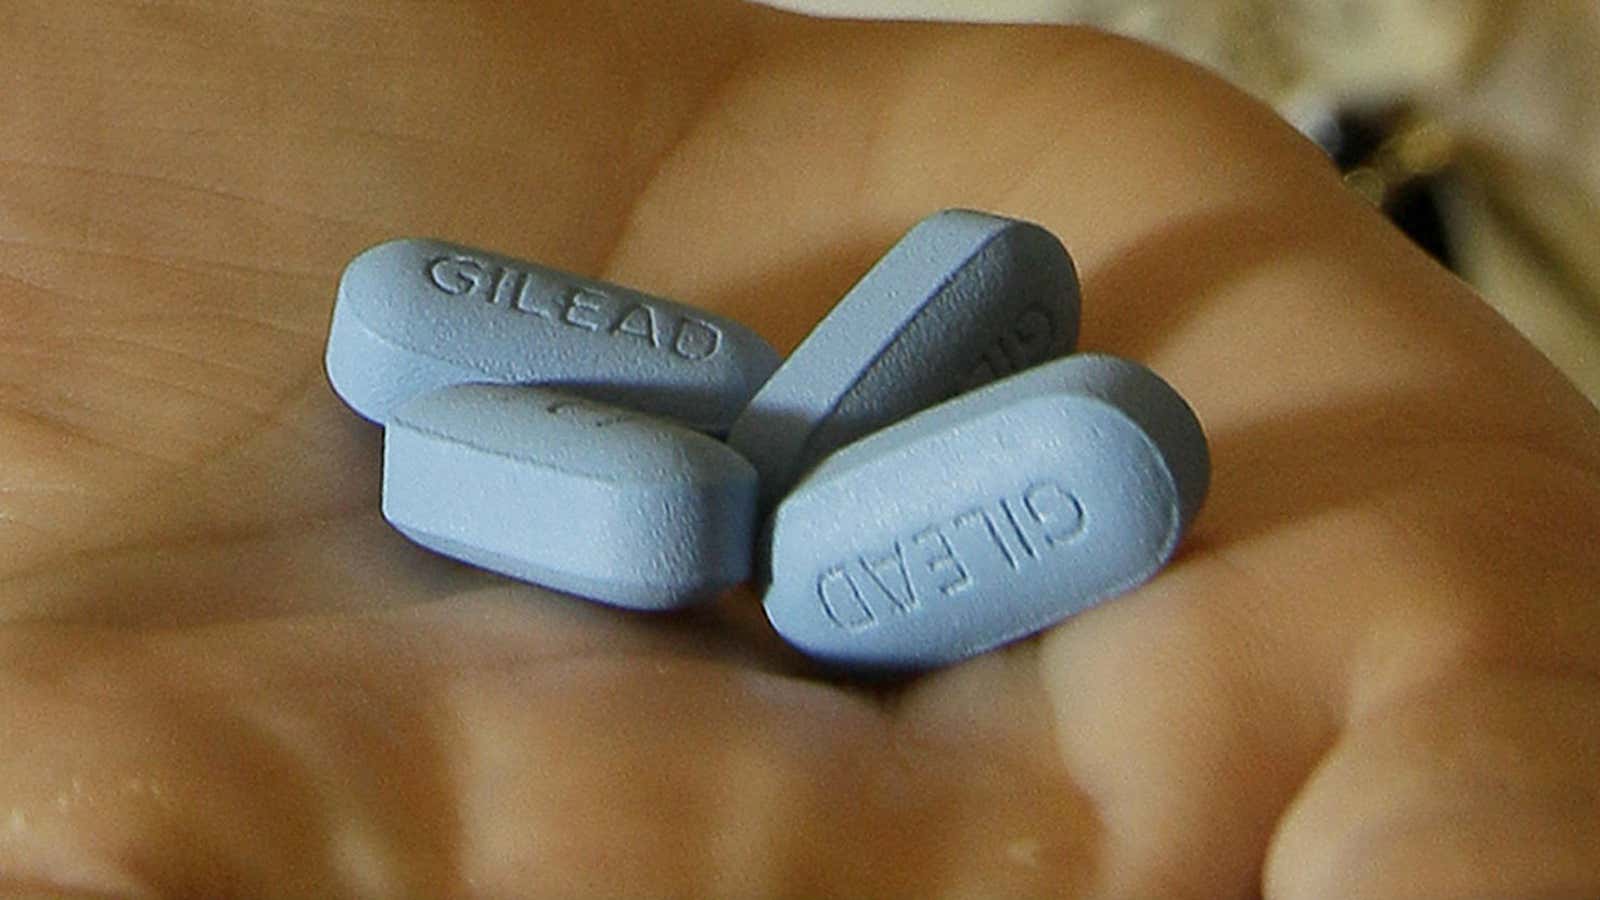 A letter showed whether customers were taking PrEP and other HIV-medications through a transparent window.